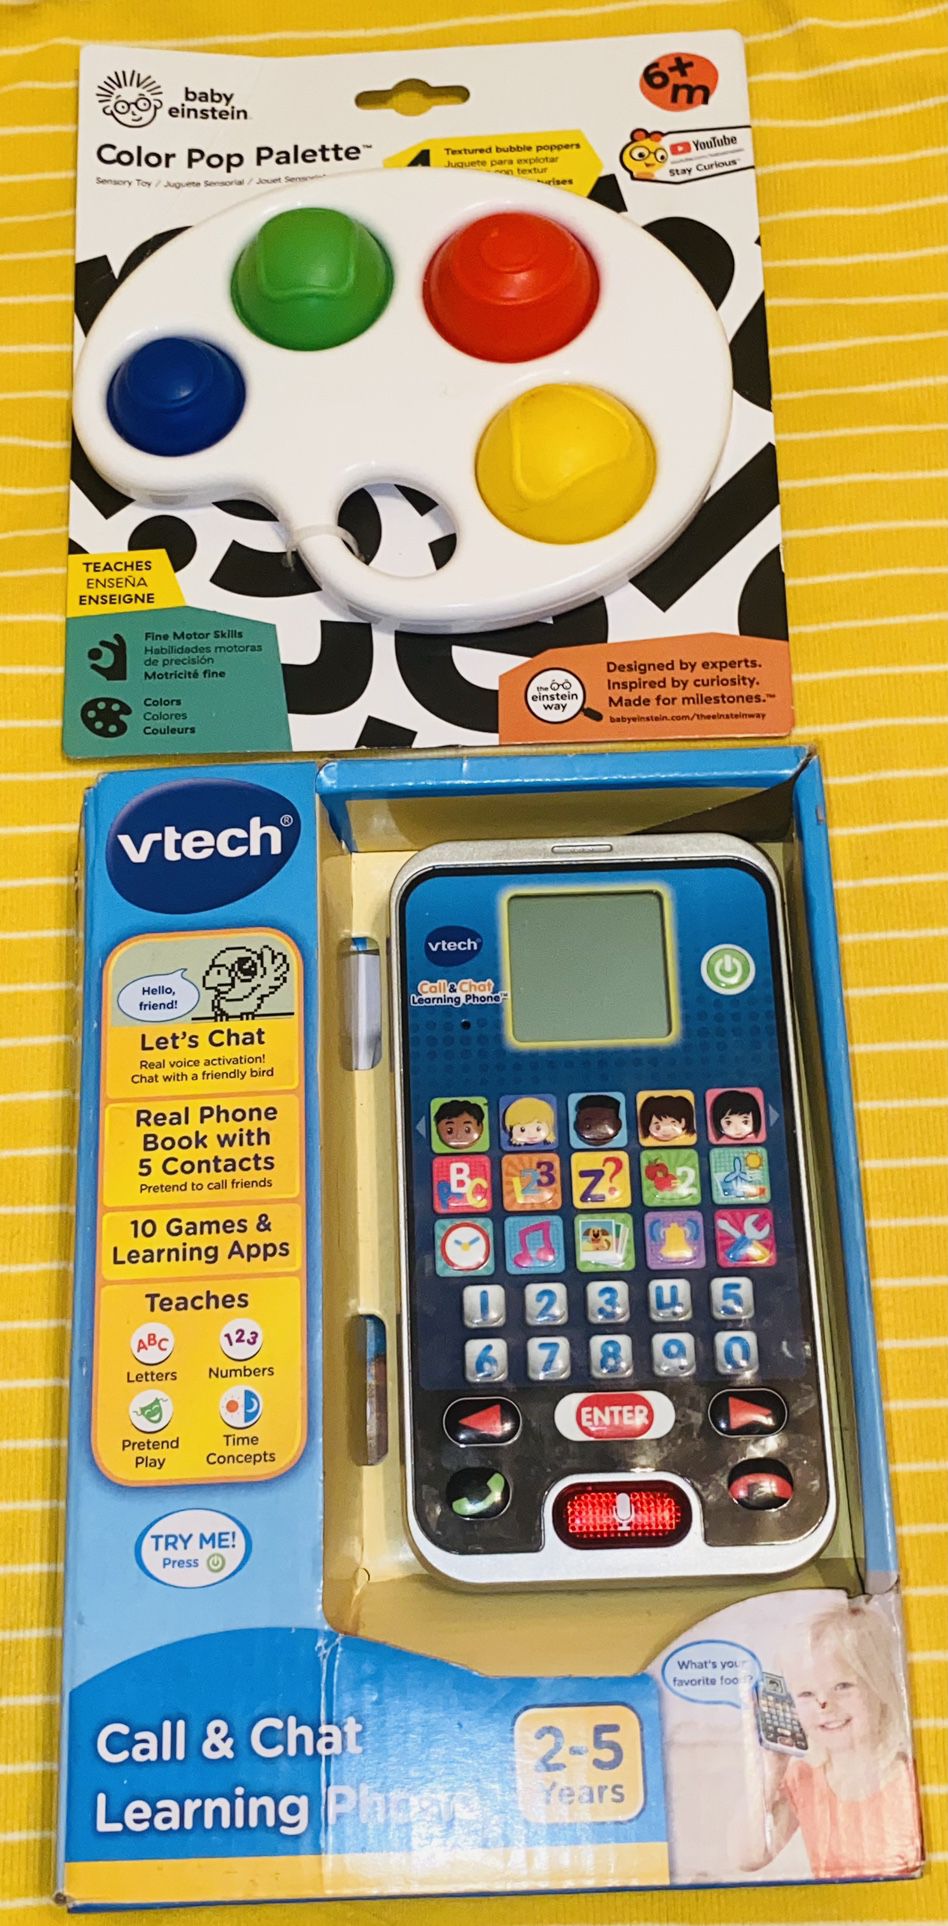 2 SET/ 6+MTHS⚫️BABY EINSTEIN⚫️🔴COLOR🔵POP🟢PALETTE🎨 & 🟡☎️🔵V-Tech Call&Chat Learning Phone ☎️ 